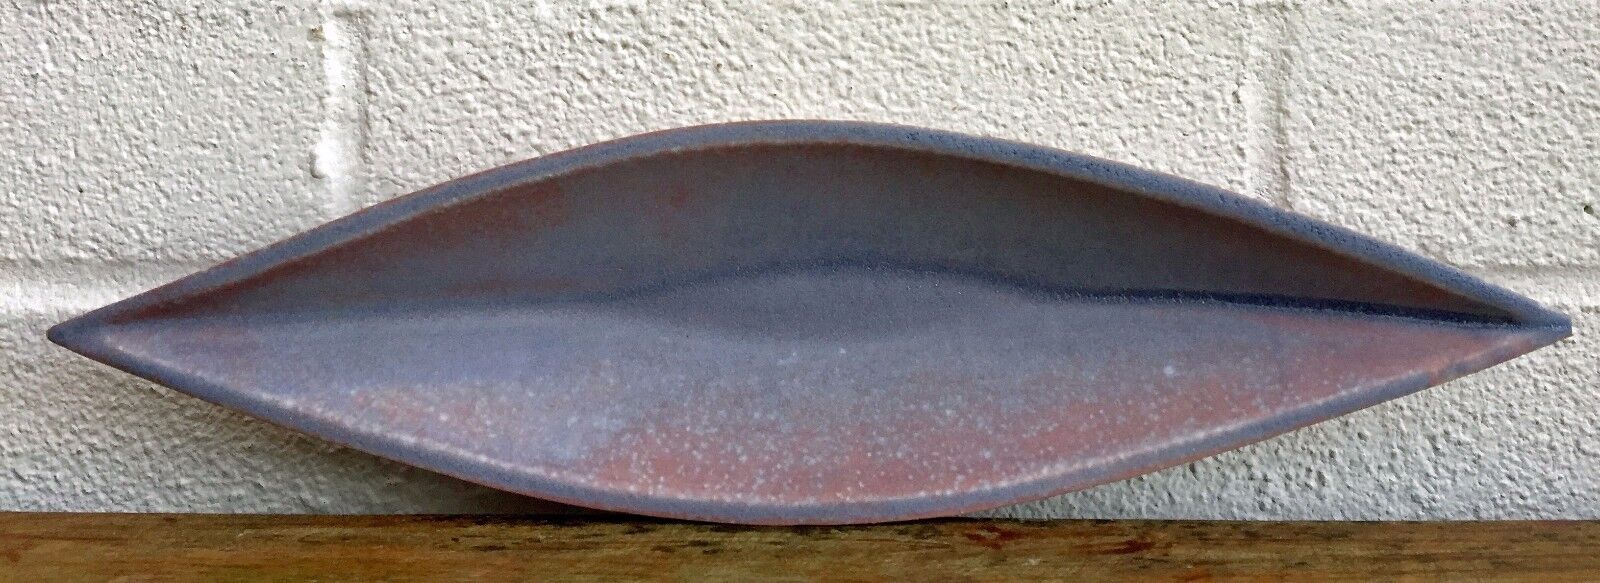 EMILY MYERS - STUDIO POTTERY BOAT SHAPE BOWL DISH -ART IN ACTION 1992 EXHIBITION?